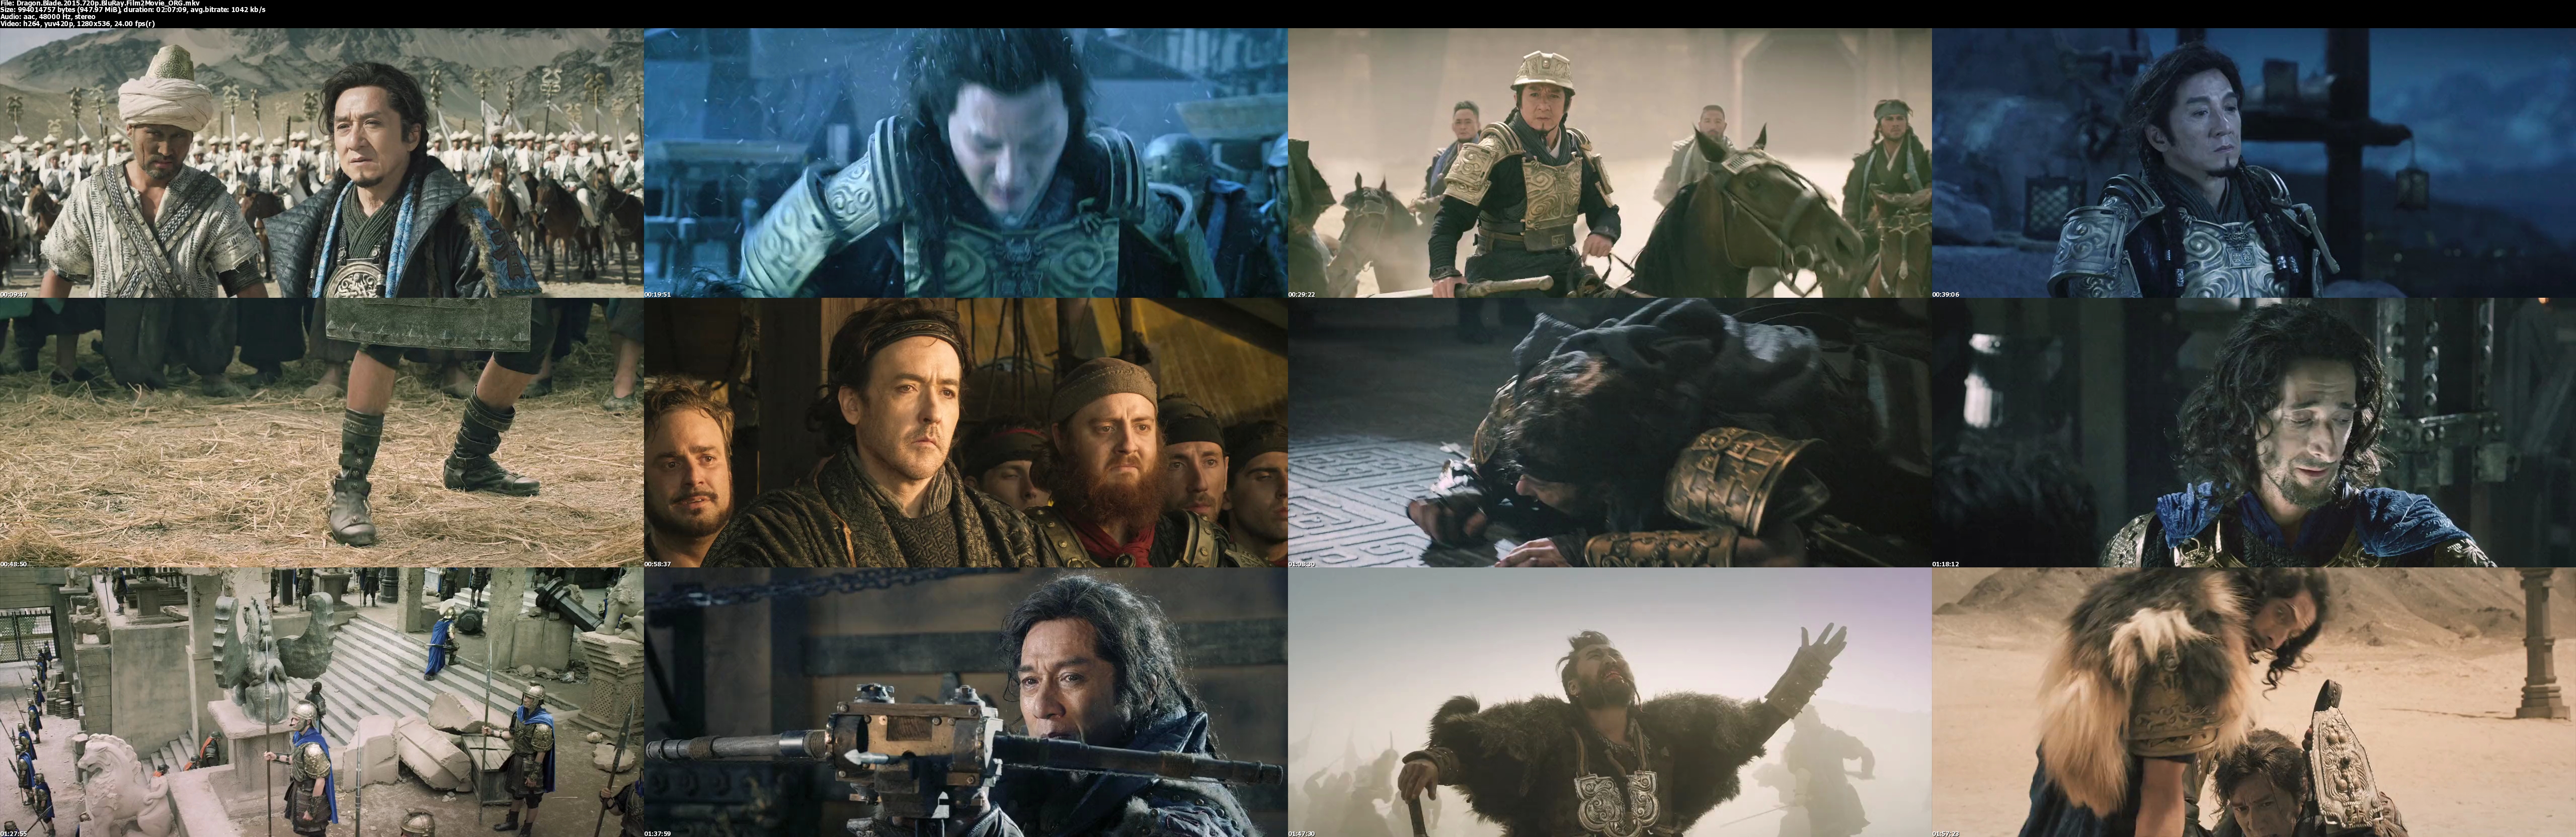 Dragon Blade  The movie and me